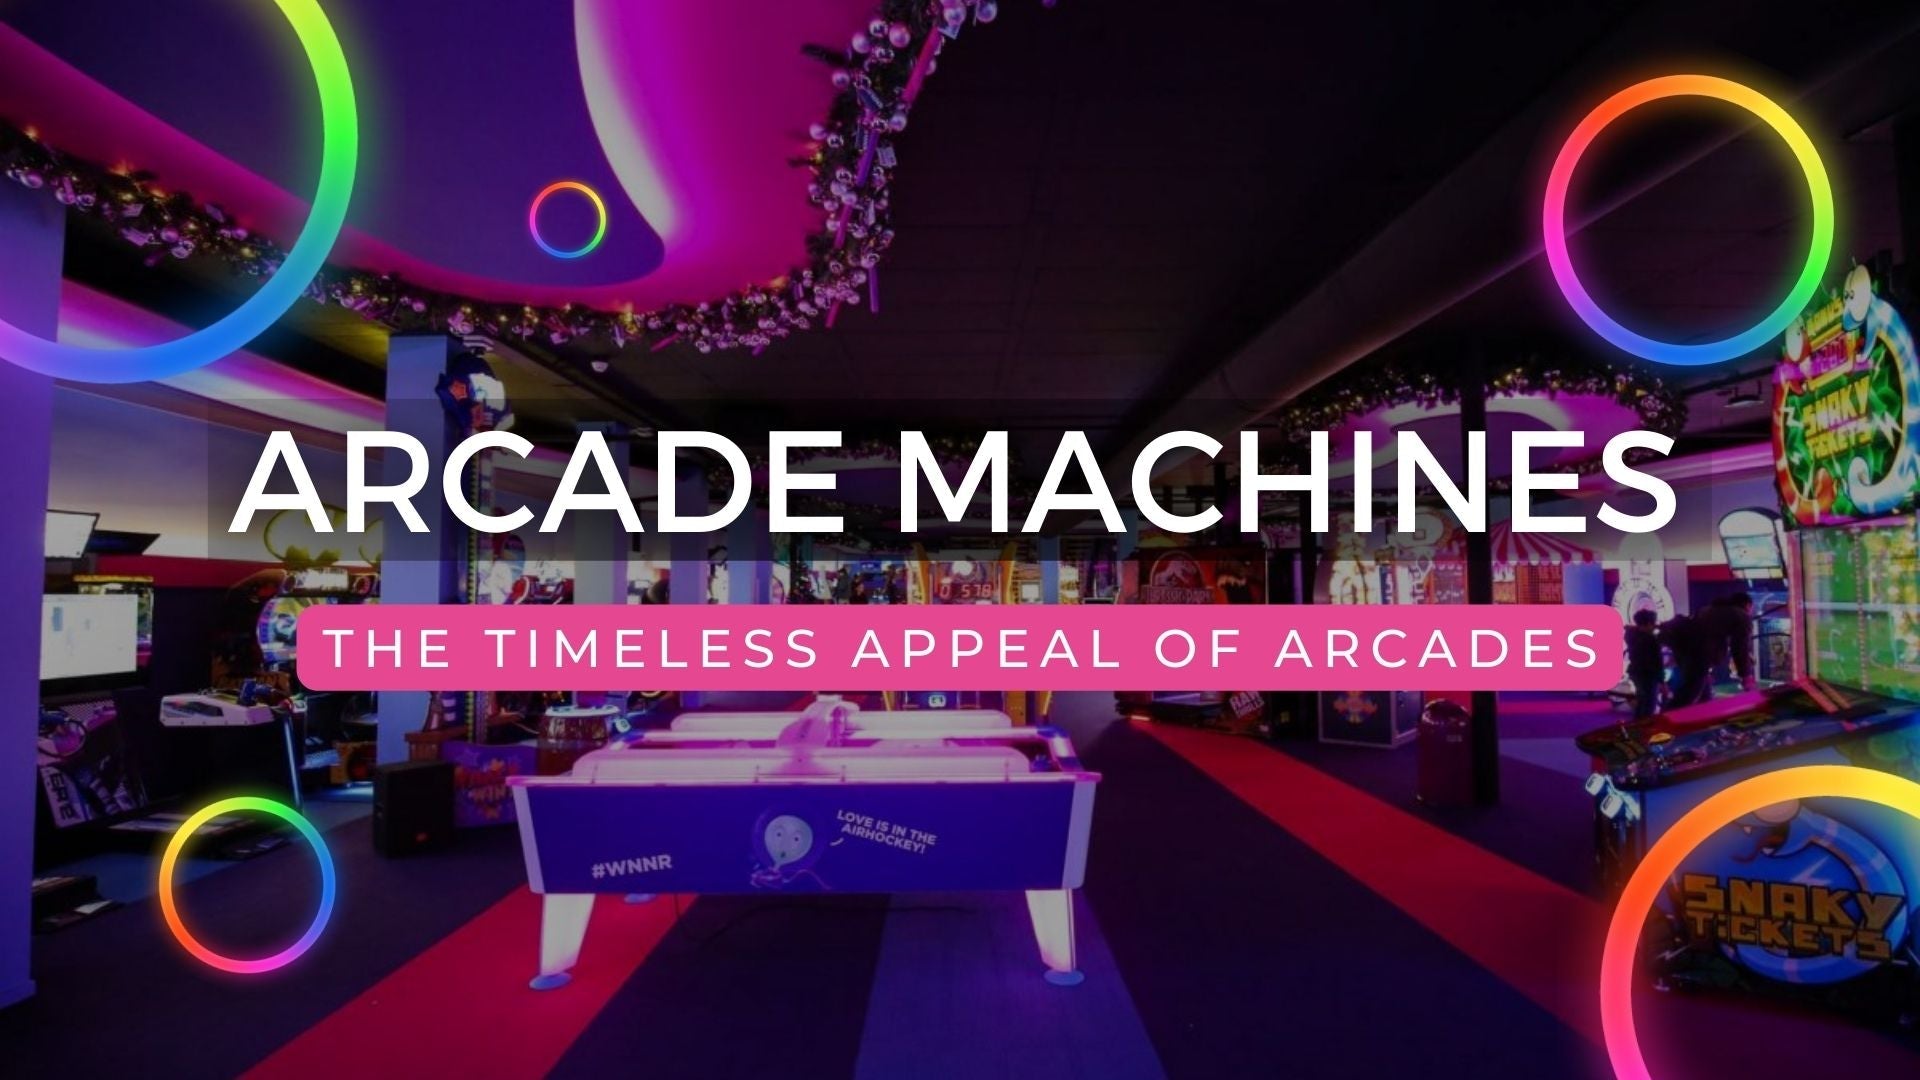 Arcade machines: the timeless appeal for arcades - Gamestate